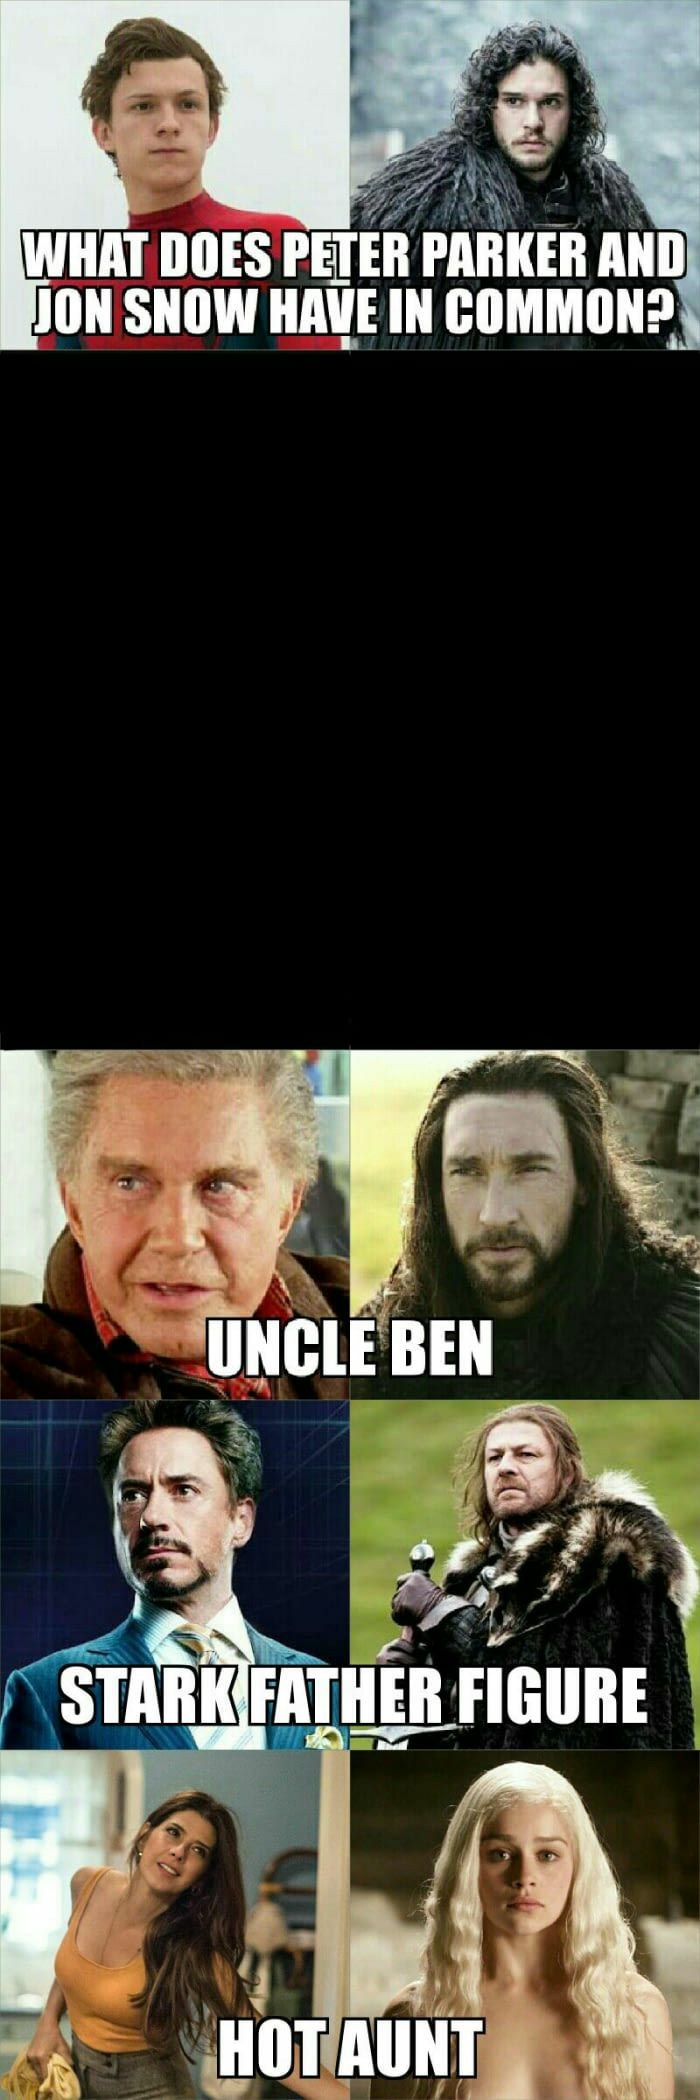 Funny meme of the similarities of Peter Parker and Jon Snow.